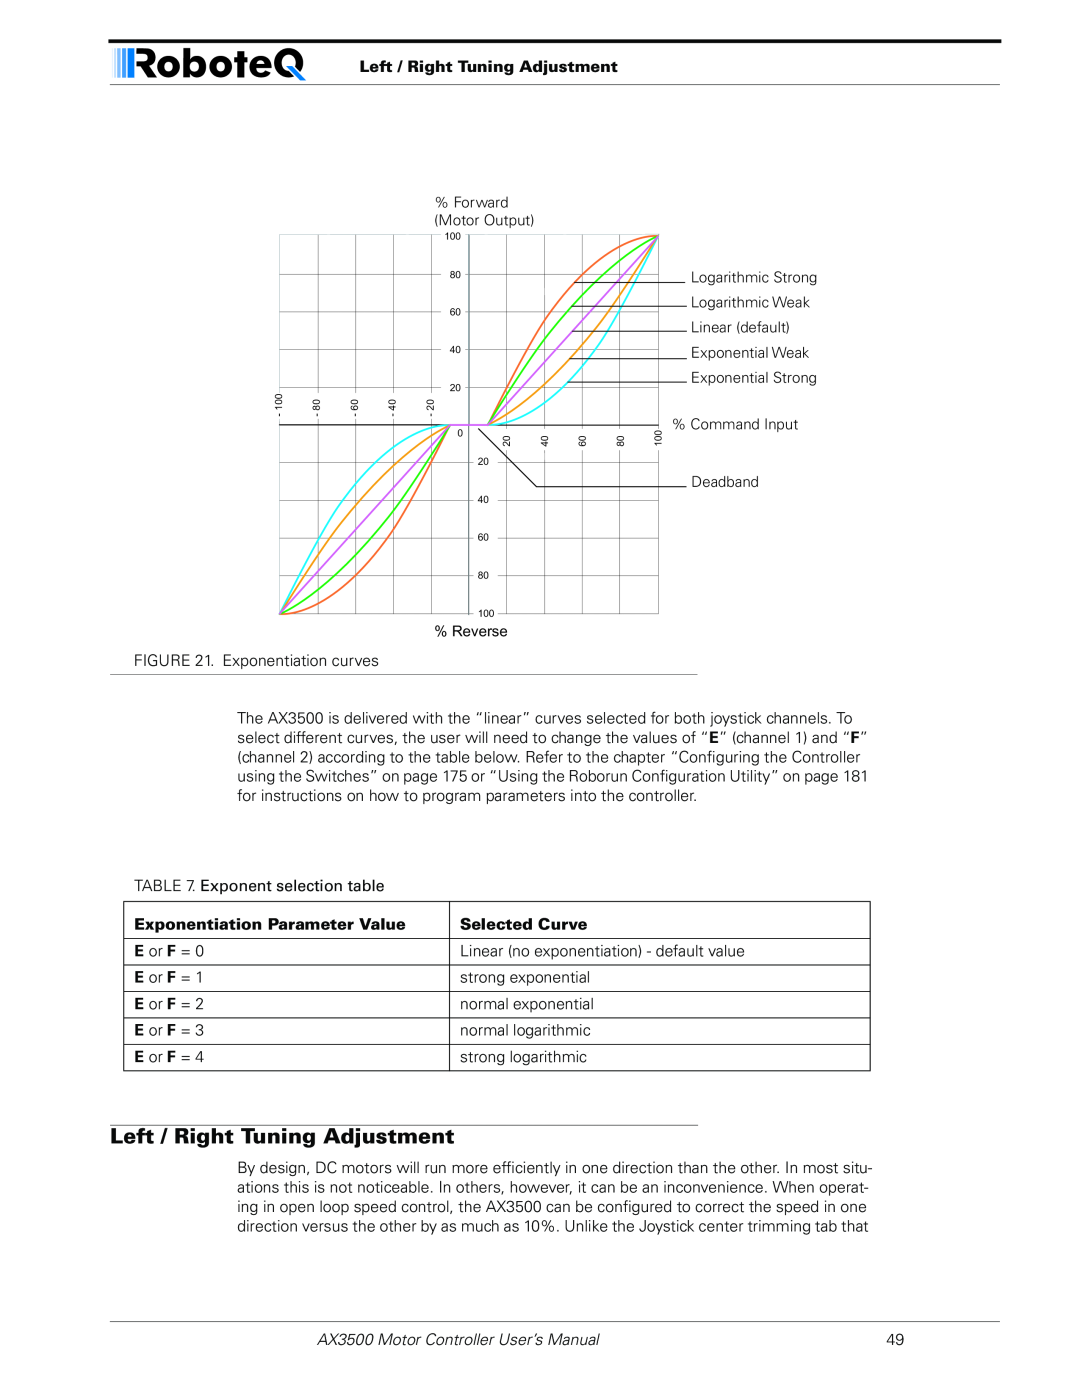 RoboteQ AX3500 user manual Left / Right Tuning Adjustment, Exponentiation Parameter Value, Selected Curve 